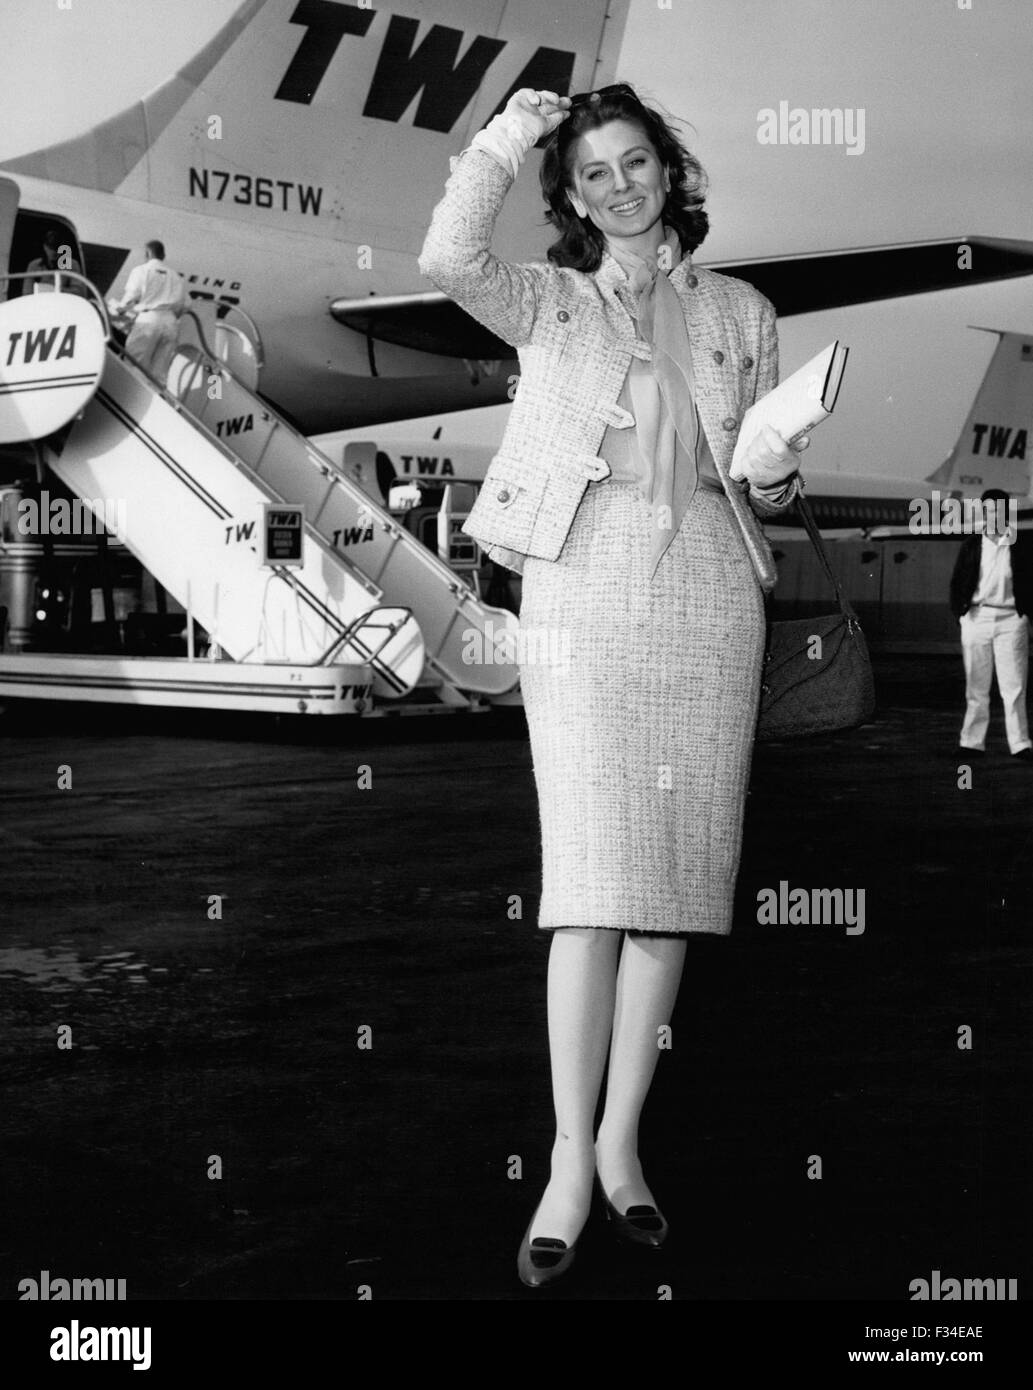 Dec. 20, 1976 - Idlewild Airport, N.Y., May 12 - Glamourous scree star and model Suzy Parker graces the airport scene on her arrival via TWA's Boeing 707 jet liner from Los Angeles. Miss Parker is in town to start location shooting for her latest movie ''The Best of Everything'' produced by Jerry Wald. (Credit Image: © Keystone Pictures USA/ZUMAPRESS.com) Stock Photo